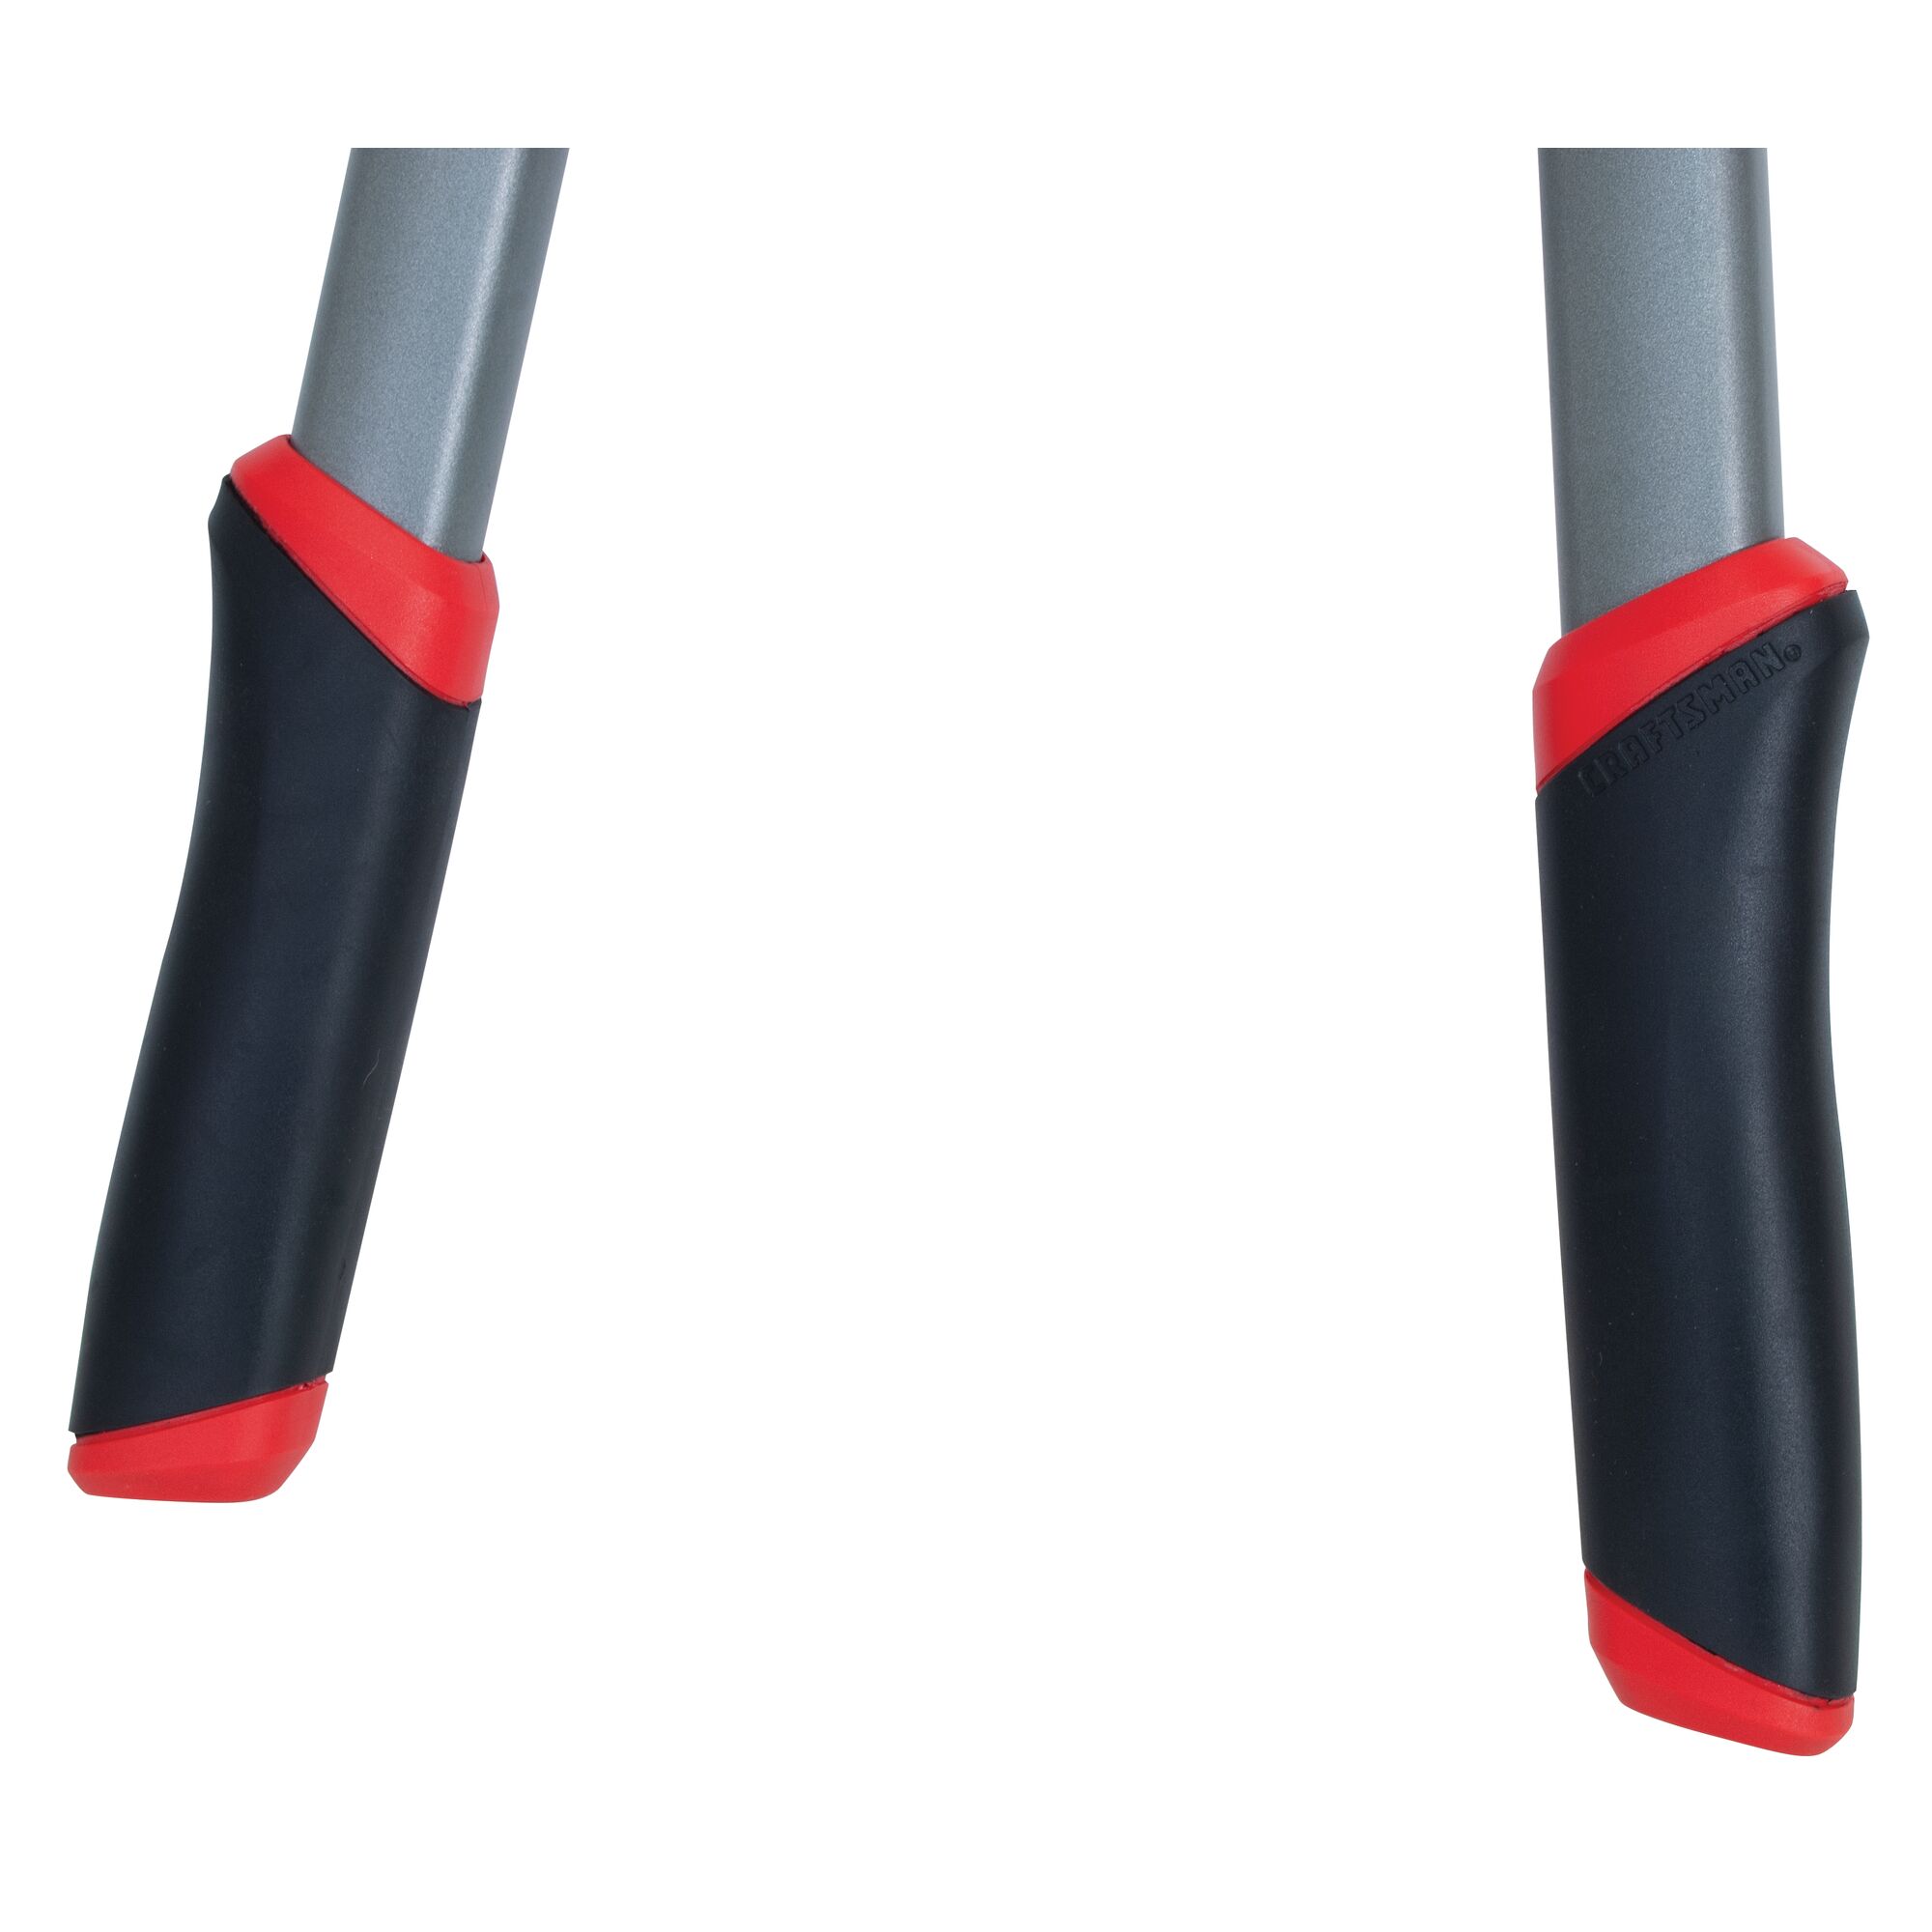 Aluminum handle feature of compound bypass lopper.